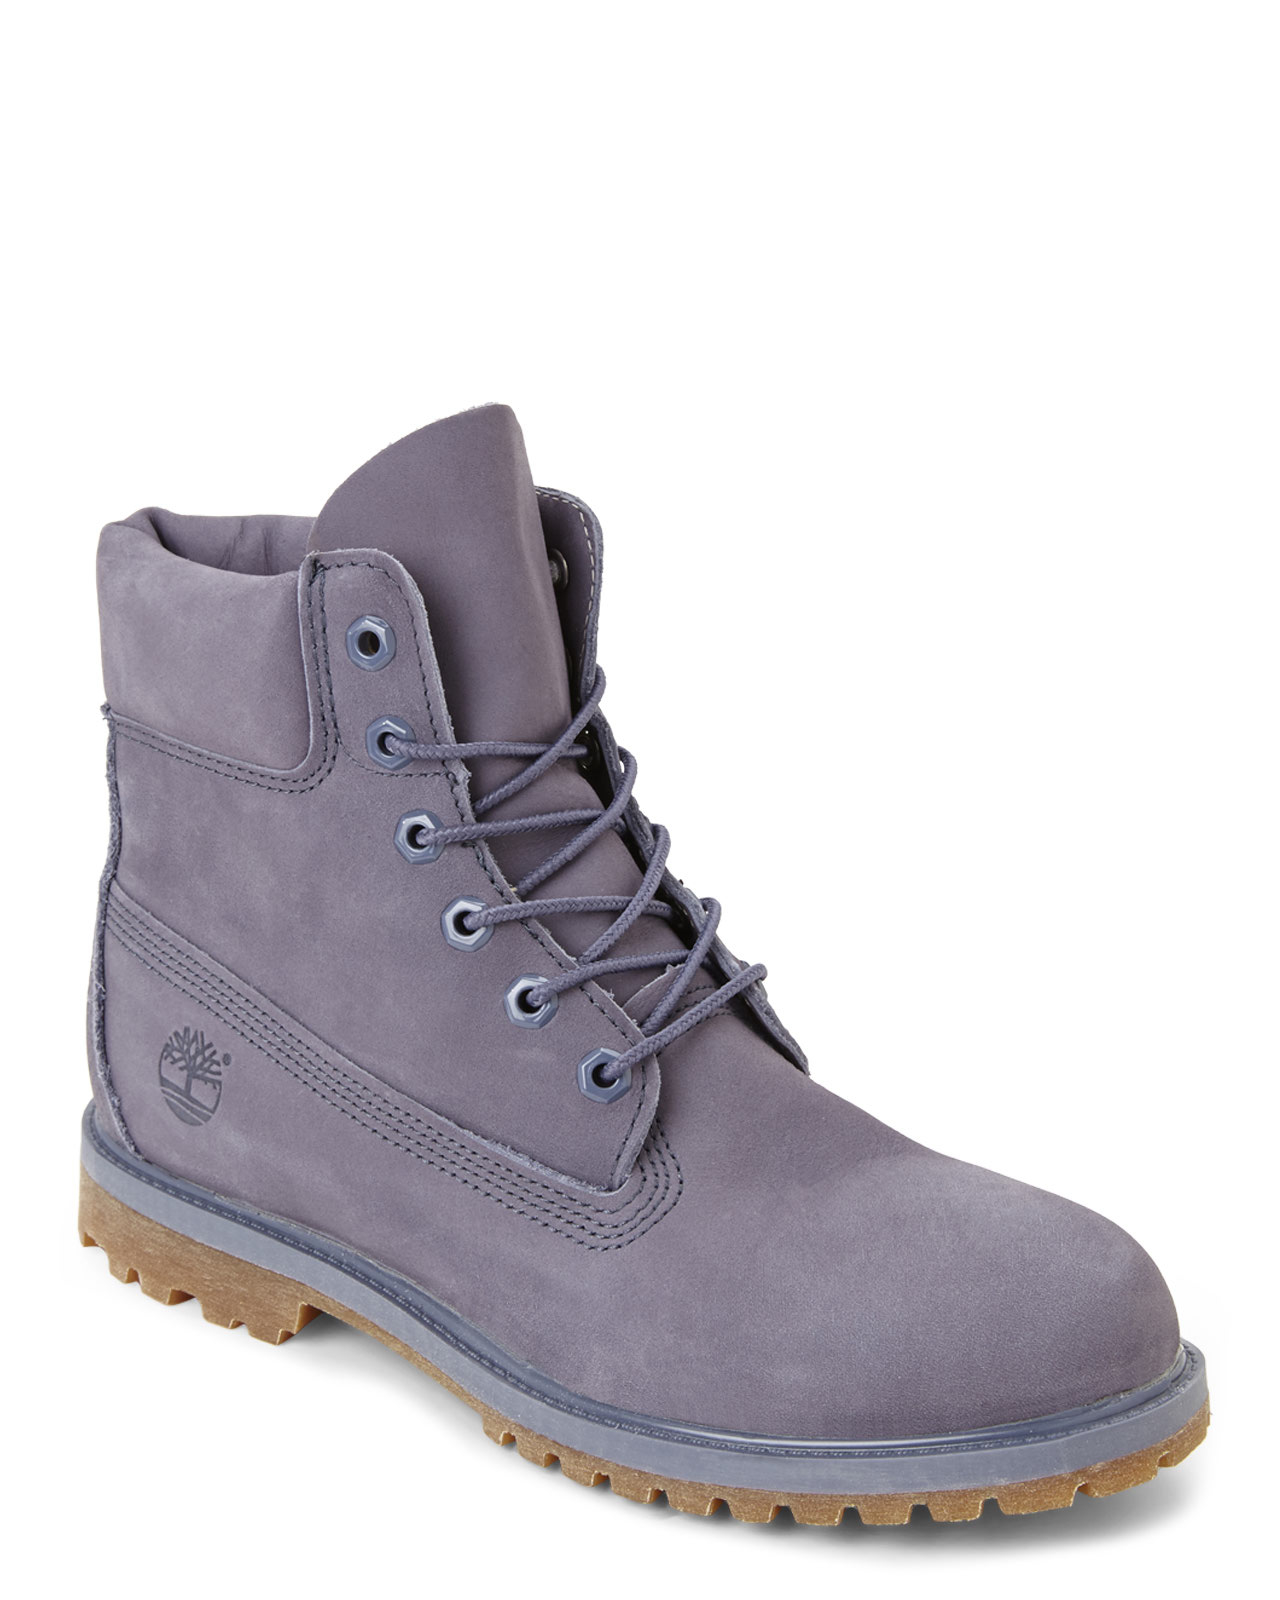 blue and gray timberlands